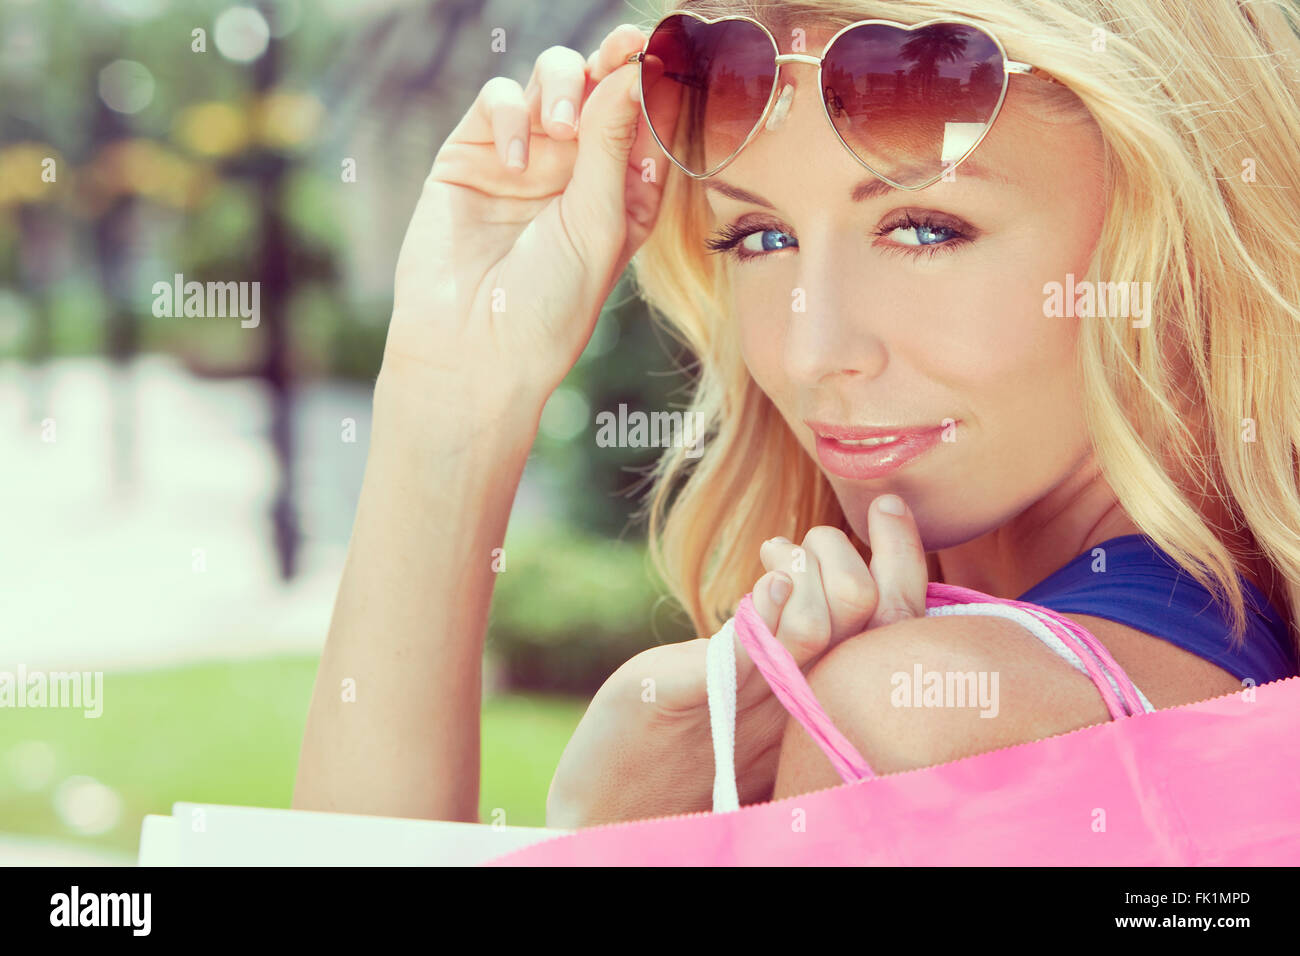 Instagram style happy and fashionable woman with colorful pink and white shopping bags and wearing heart shaped sunglasses Stock Photo